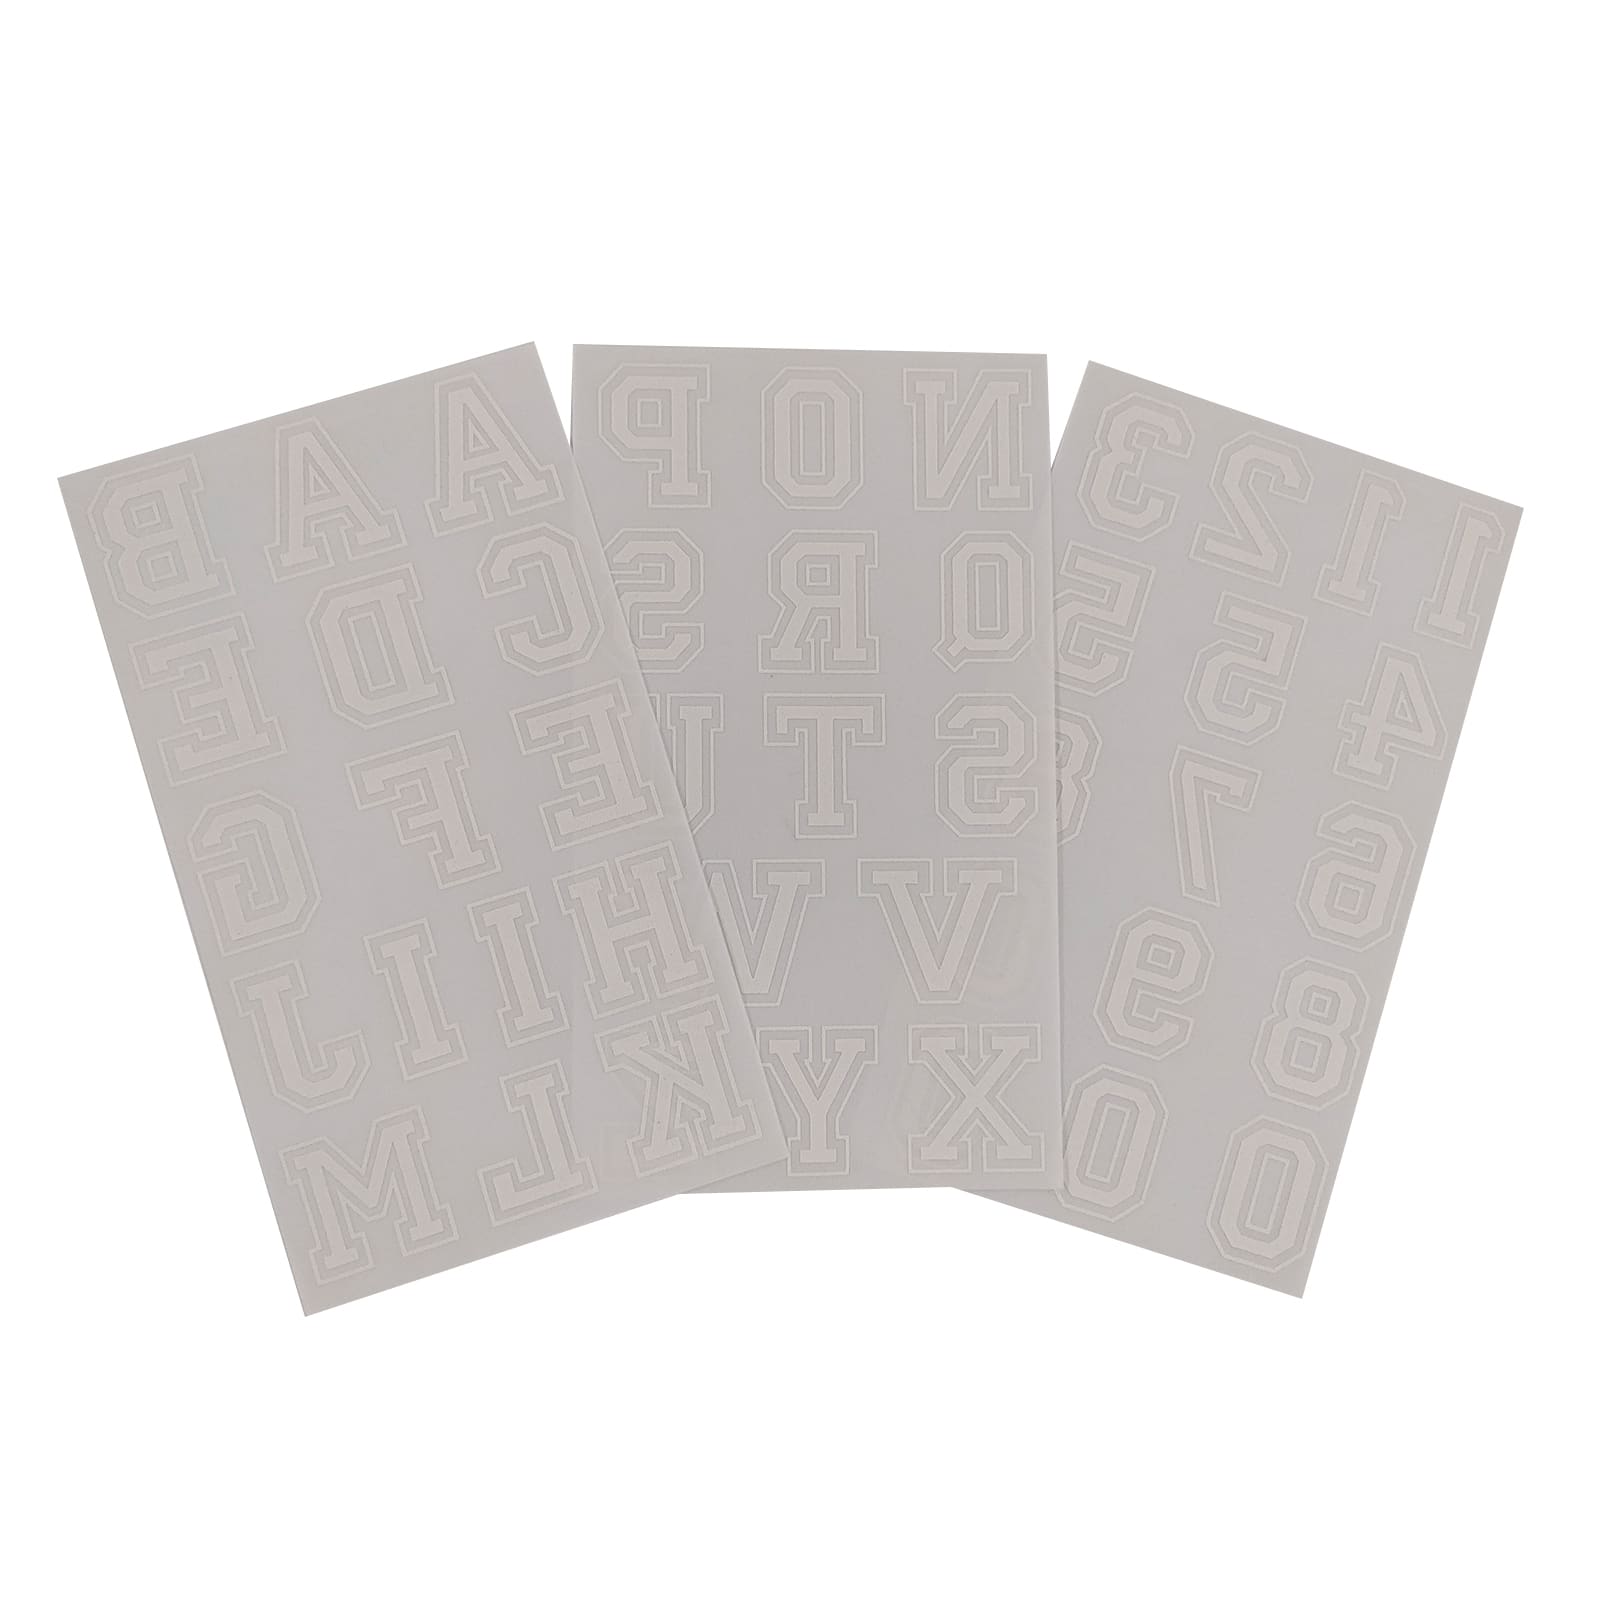 12 Packs: 46 ct. (552 total) 1.75&#x22; Iron-On White Flocked Collegiate Letters by Imagin8&#x2122;